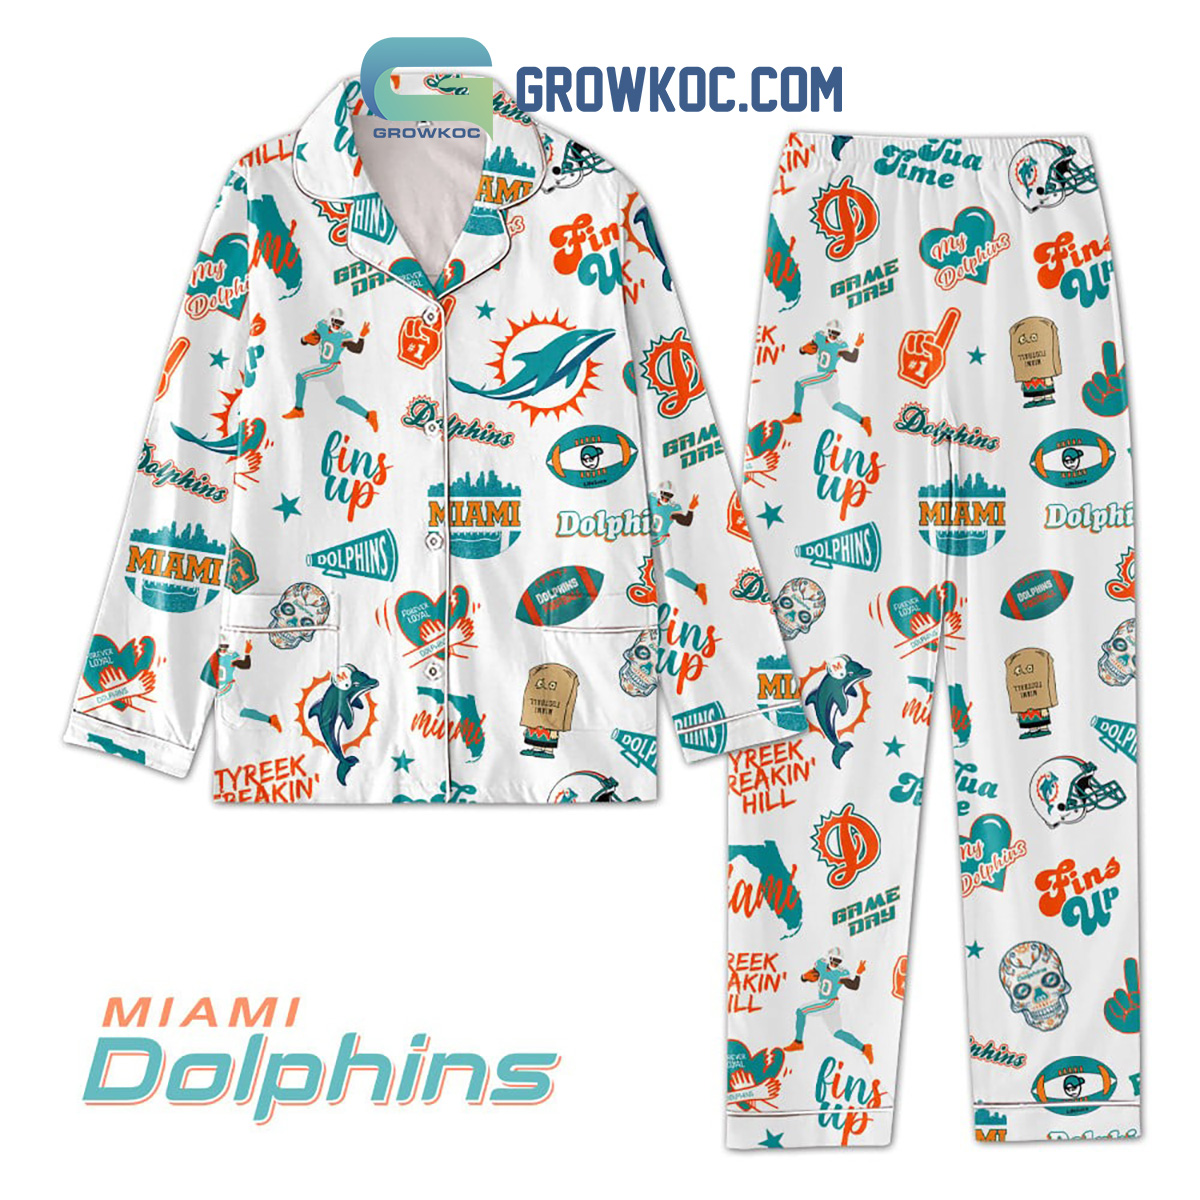 Miami Dolphins Fins Up Game Day Pajamas Set